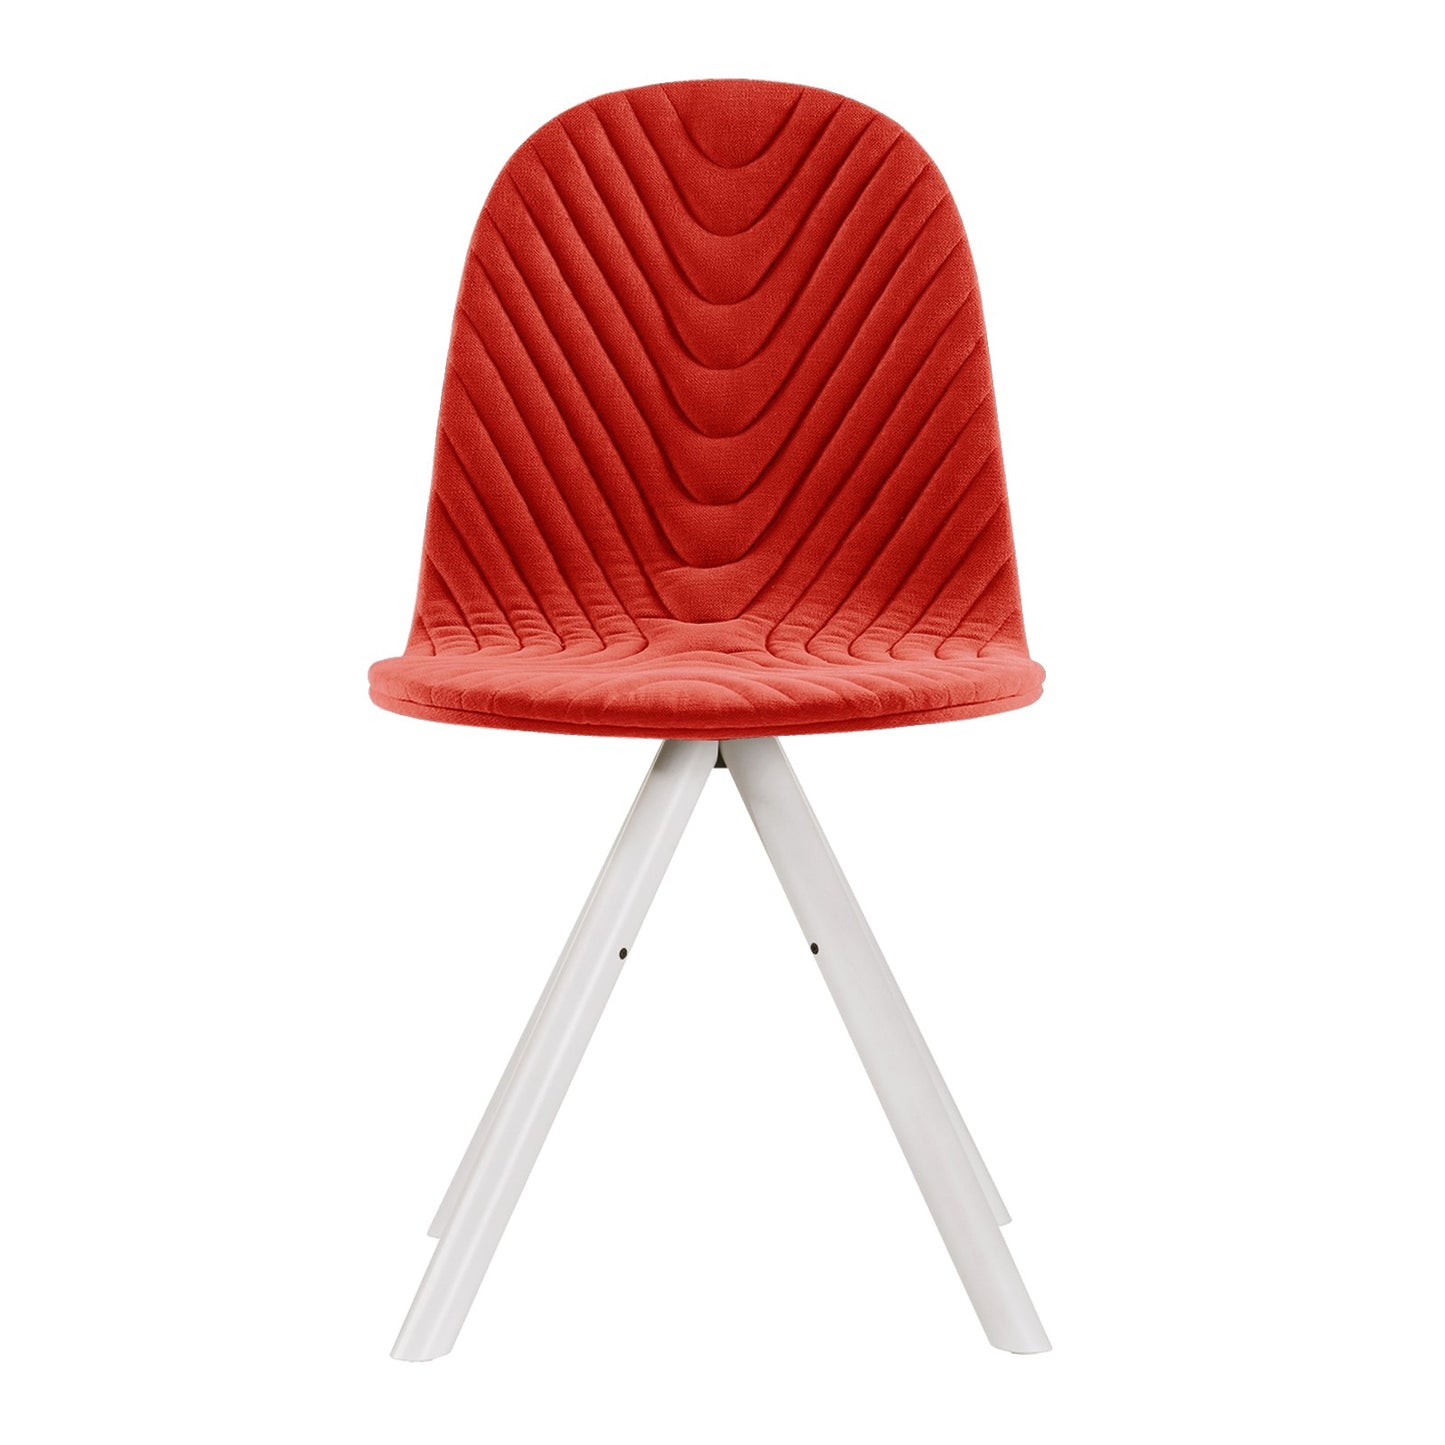 Chair Mannequin 01 white - Red